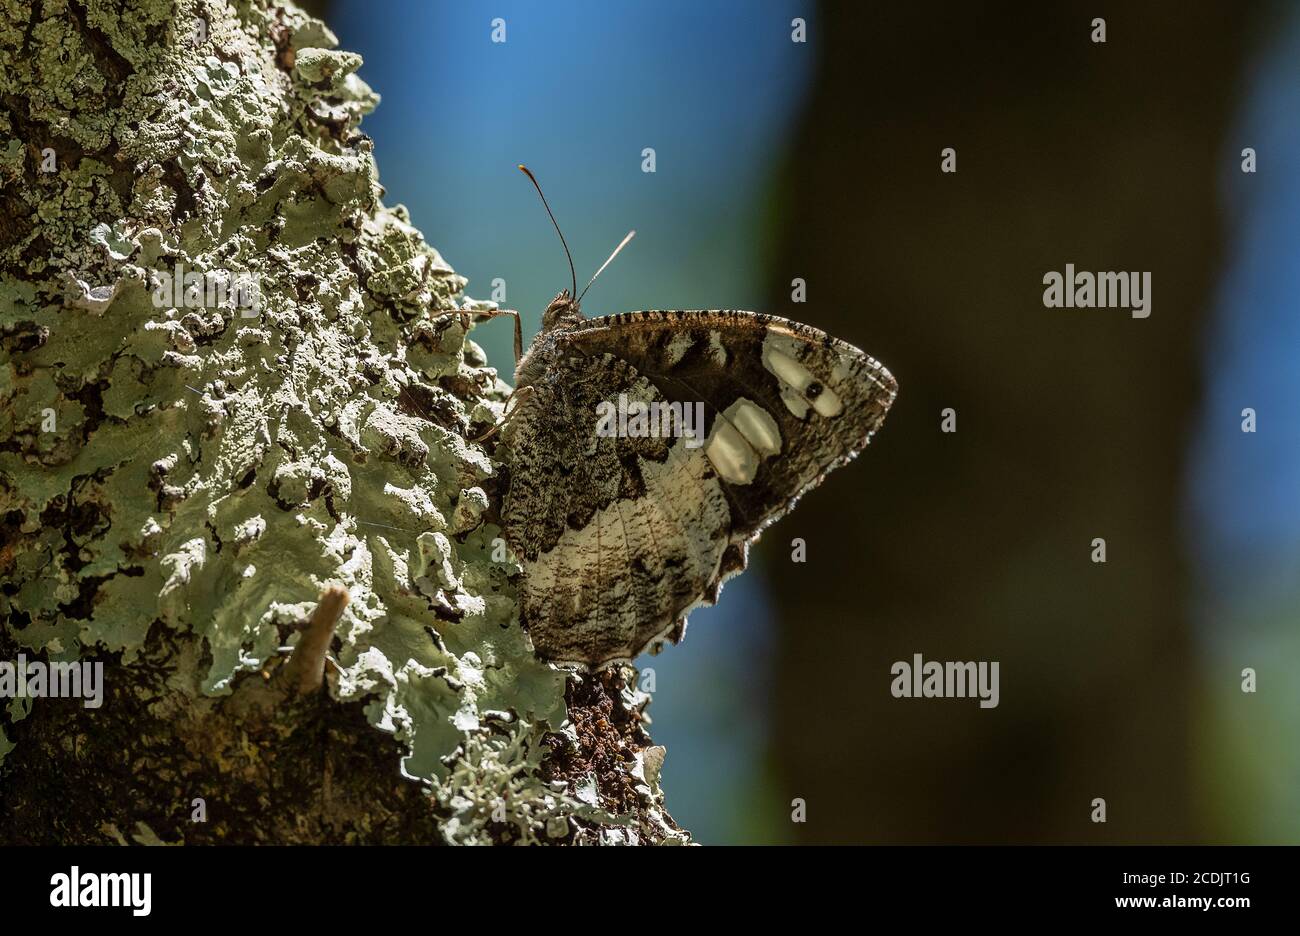 Great Banded Grayling, Brintesia circe, perched on lichen-clad oak branch, Brenne, France. Stock Photo